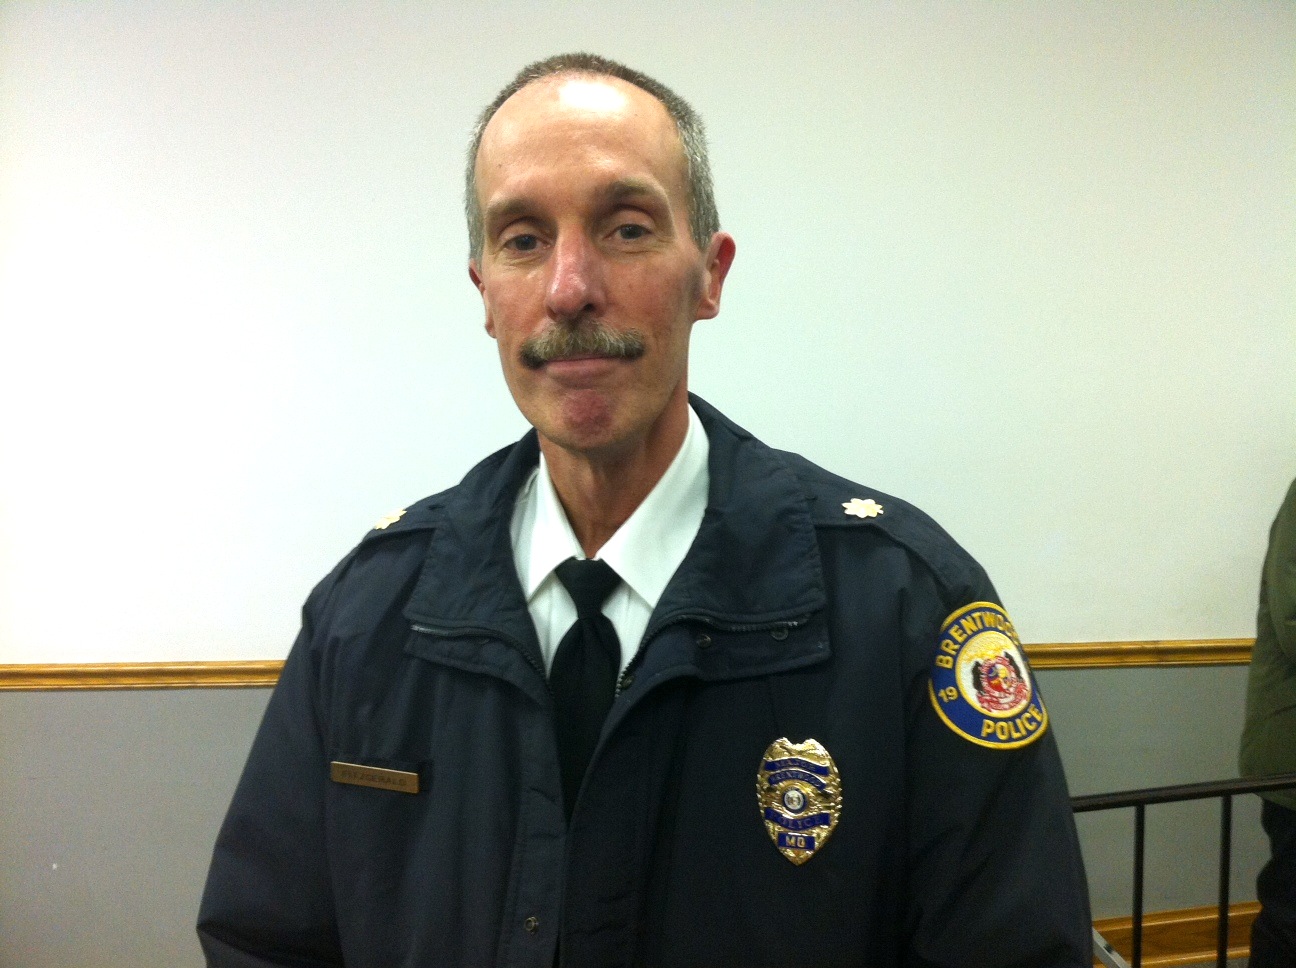 Dan Fitzgerald appointed Brentwood Chief of Police